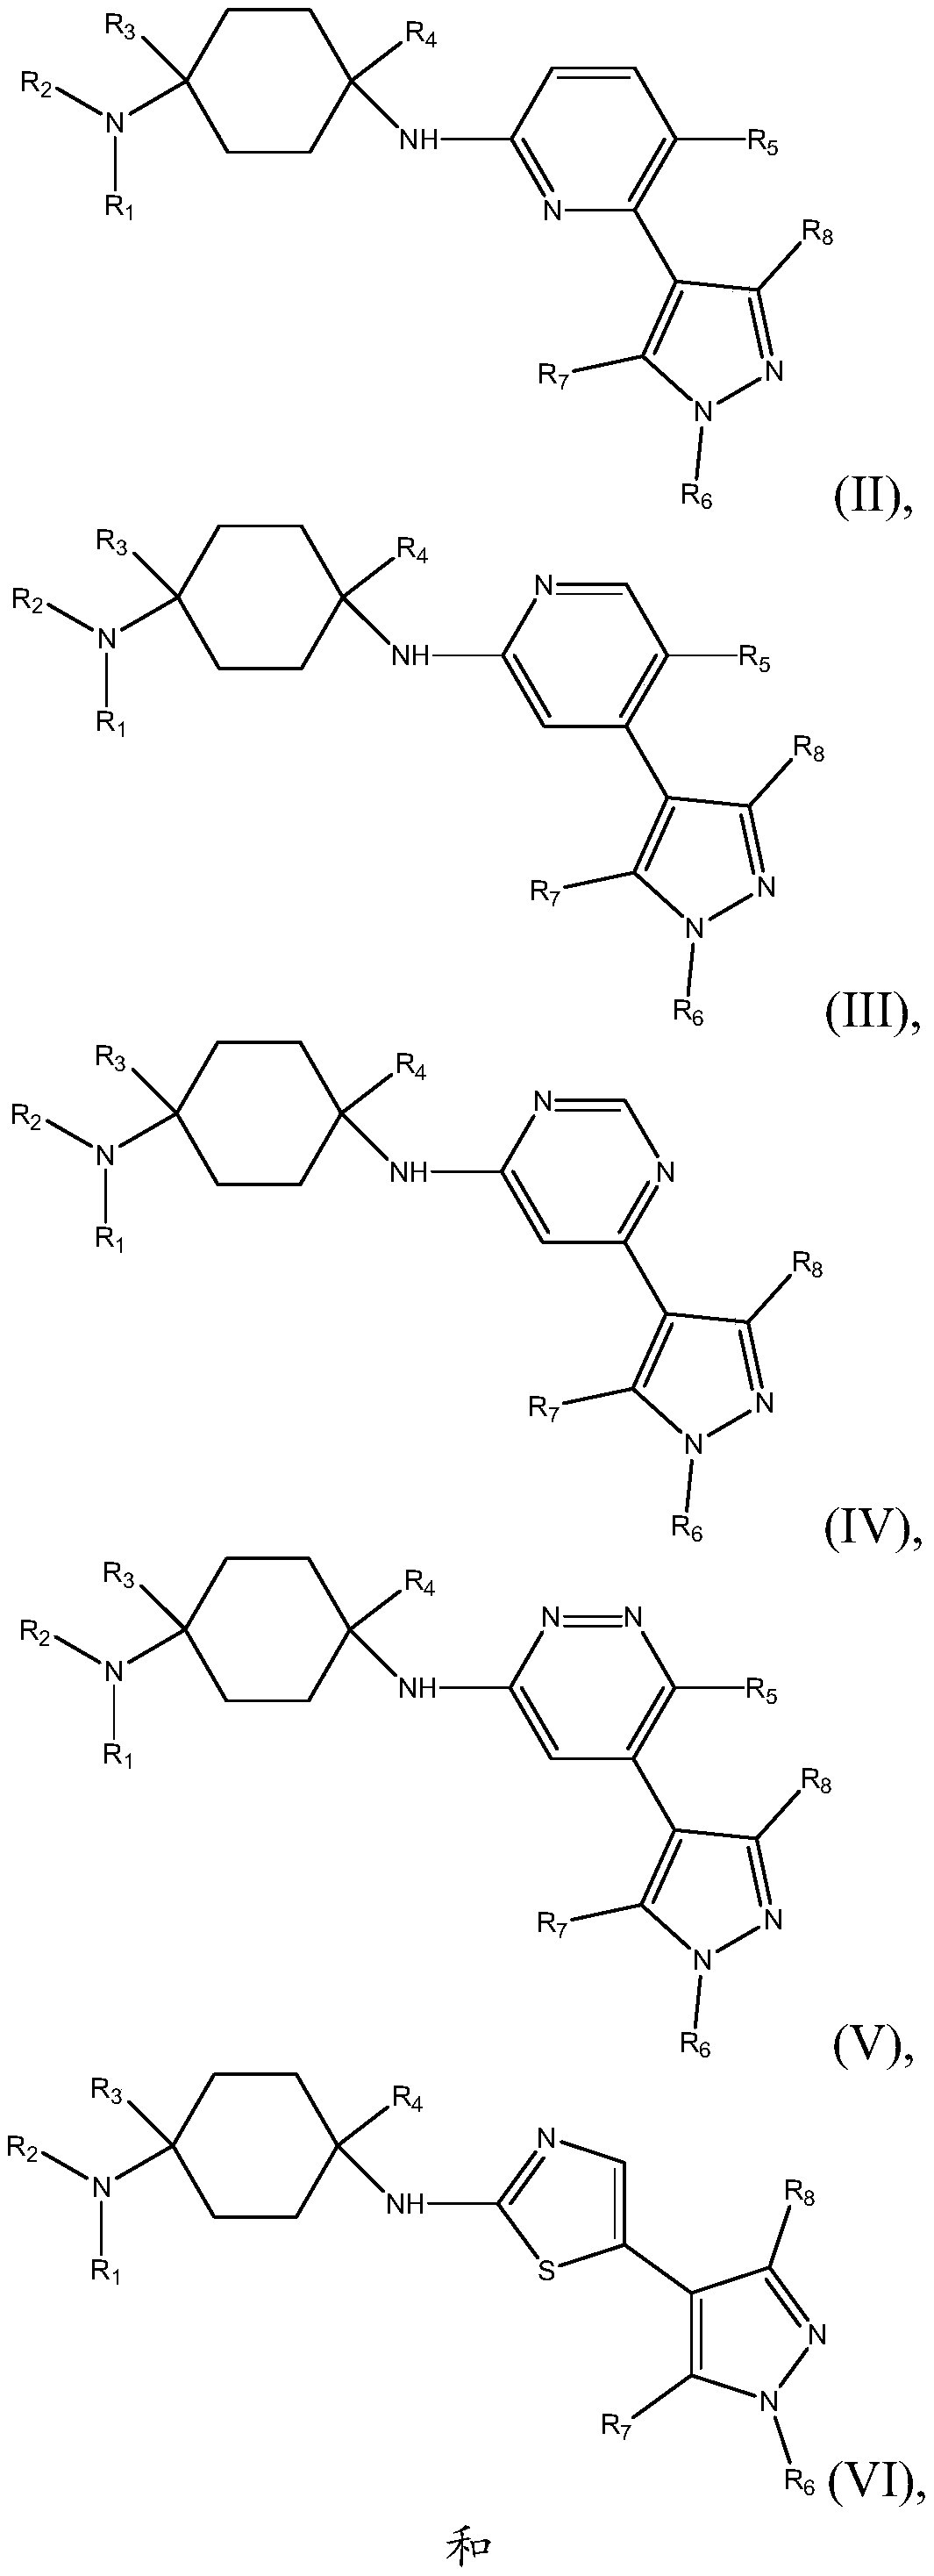 N1-(4-(5-(cyclopropylmethyl)-1 -methyl-1 h-pyrazol-4-yl)pyridin-2-yl)cyclohexane-1,4-diamine derivatives and related compounds as ck1 and/or iraki inhibitors for treating cancer